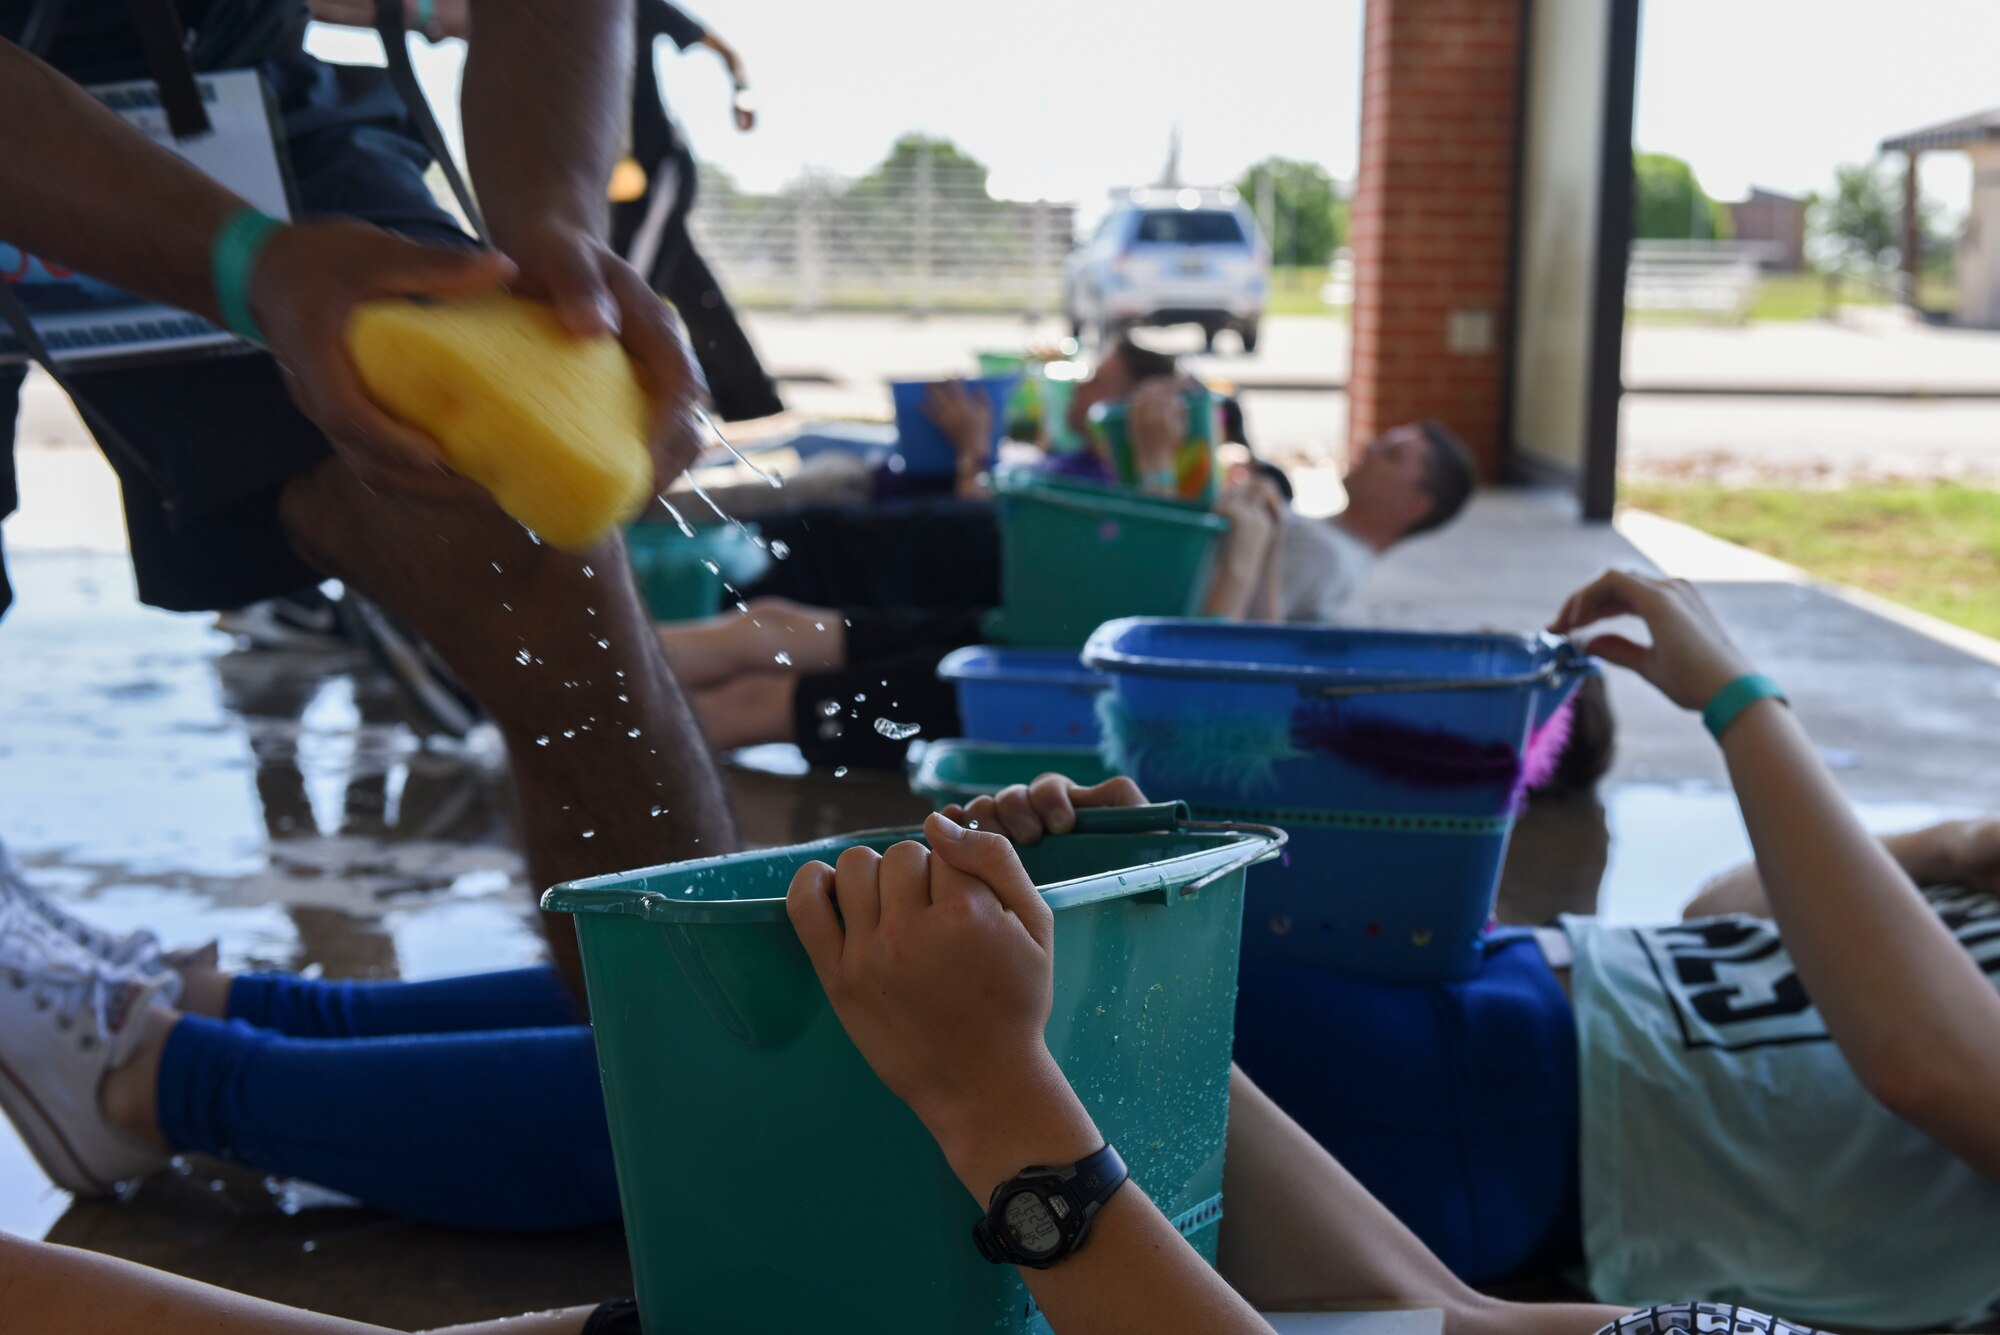 Participants of the sixth annual Sexual Assault Response Coordinator Challenge fill empty buckets with water using sponges at the Parade Field on Goodfellow Air Force Base, Texas, April 30, 2016. The Sexual Assault Prevention and Response staff educated contenders by asking them questions about SAPR. (U.S. Air Force photo by Airman 1st Class Chase Sousa/Released)